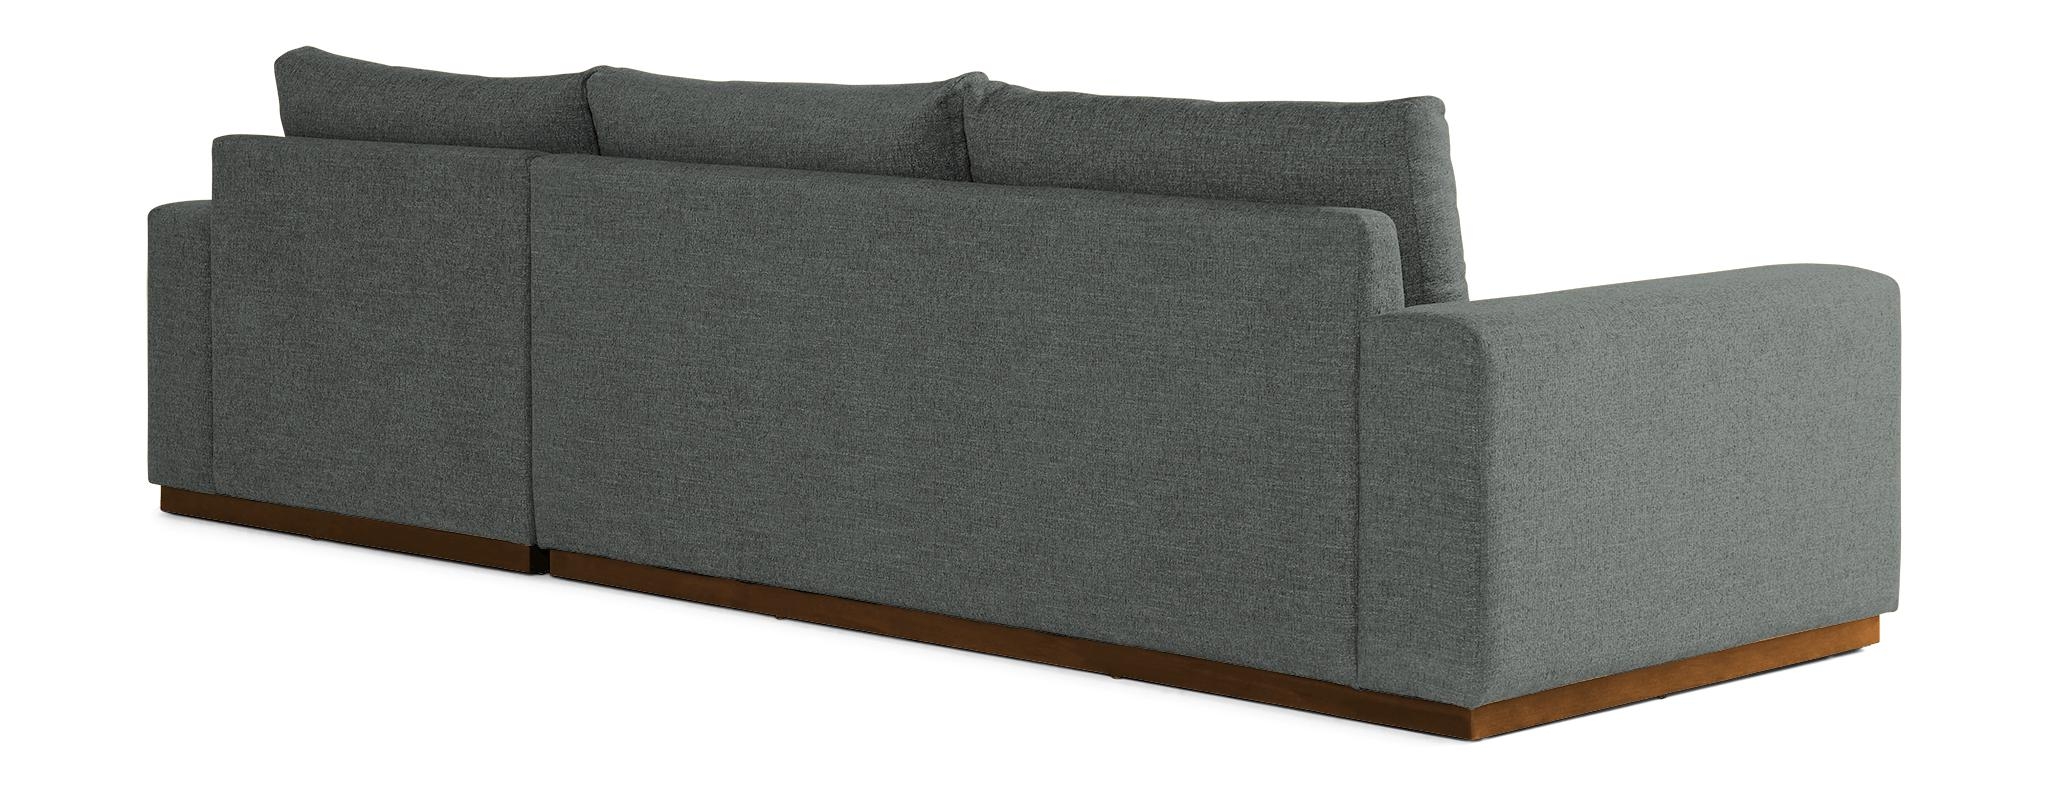 Gray Holt Mid Century Modern Sectional with Storage - Essence Ash - Mocha - Right - Image 4